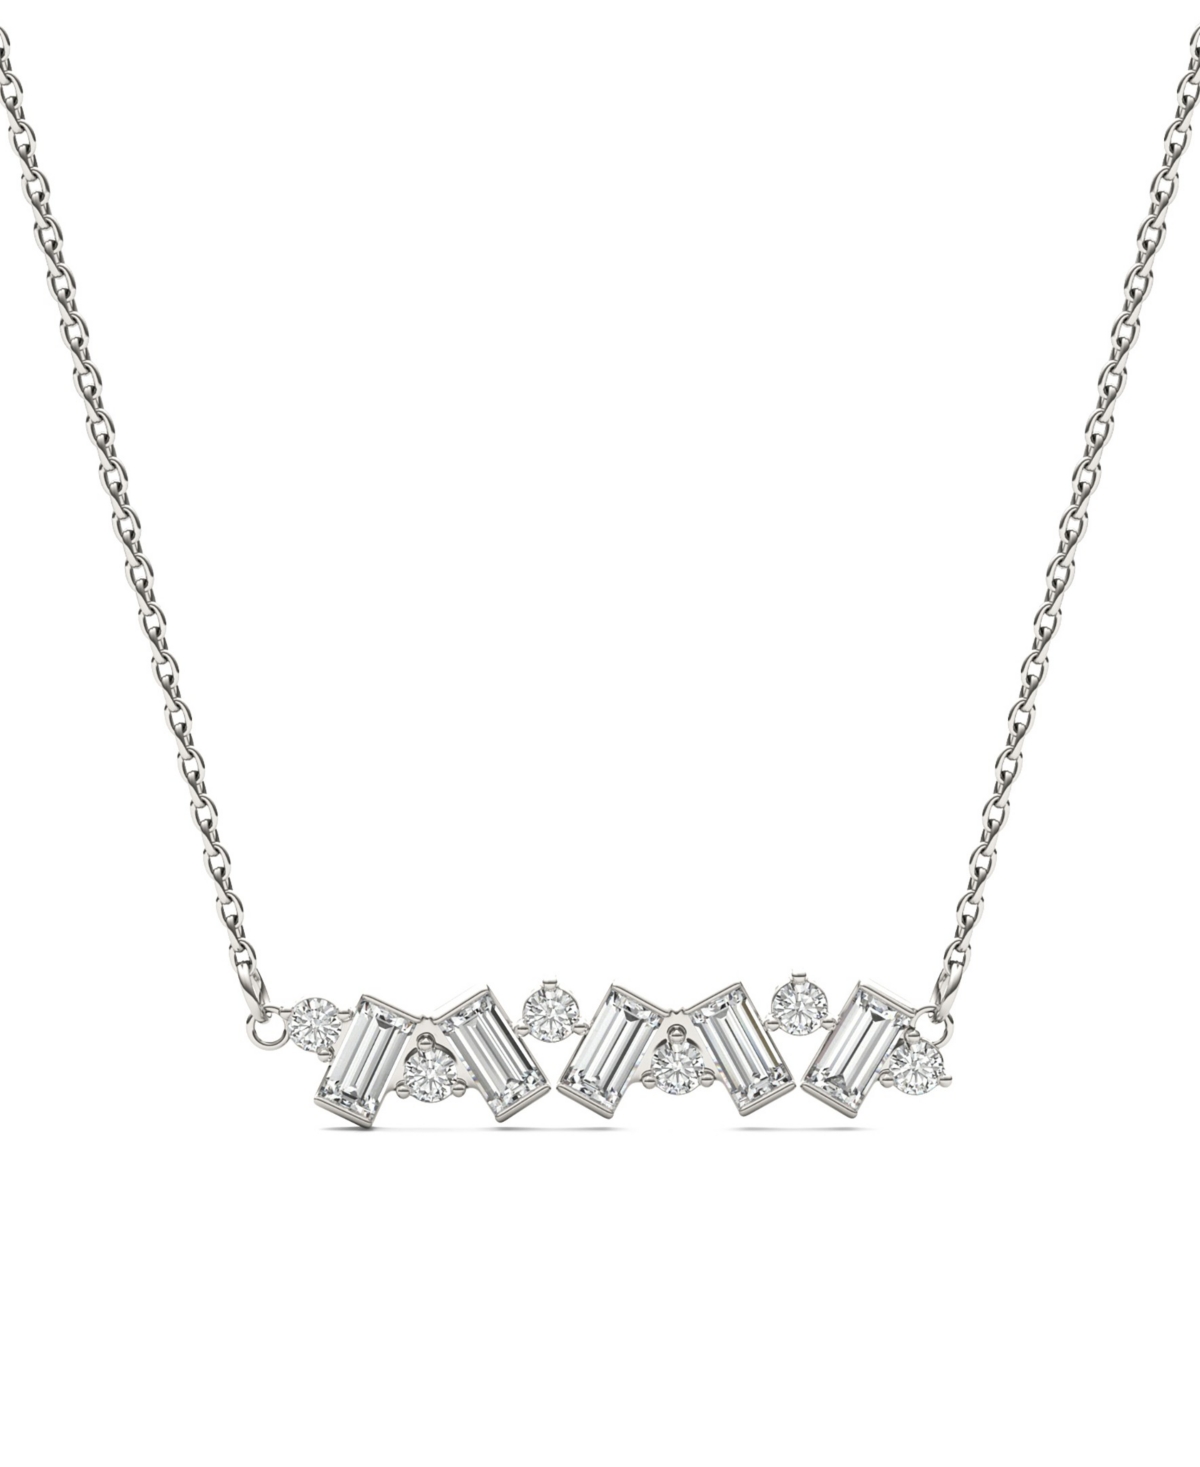 Moissanite Fixed Baguette Necklace (3/4 Carat Total Weight Certified Diamond Equivalent) in 14K White Gold - White Gold